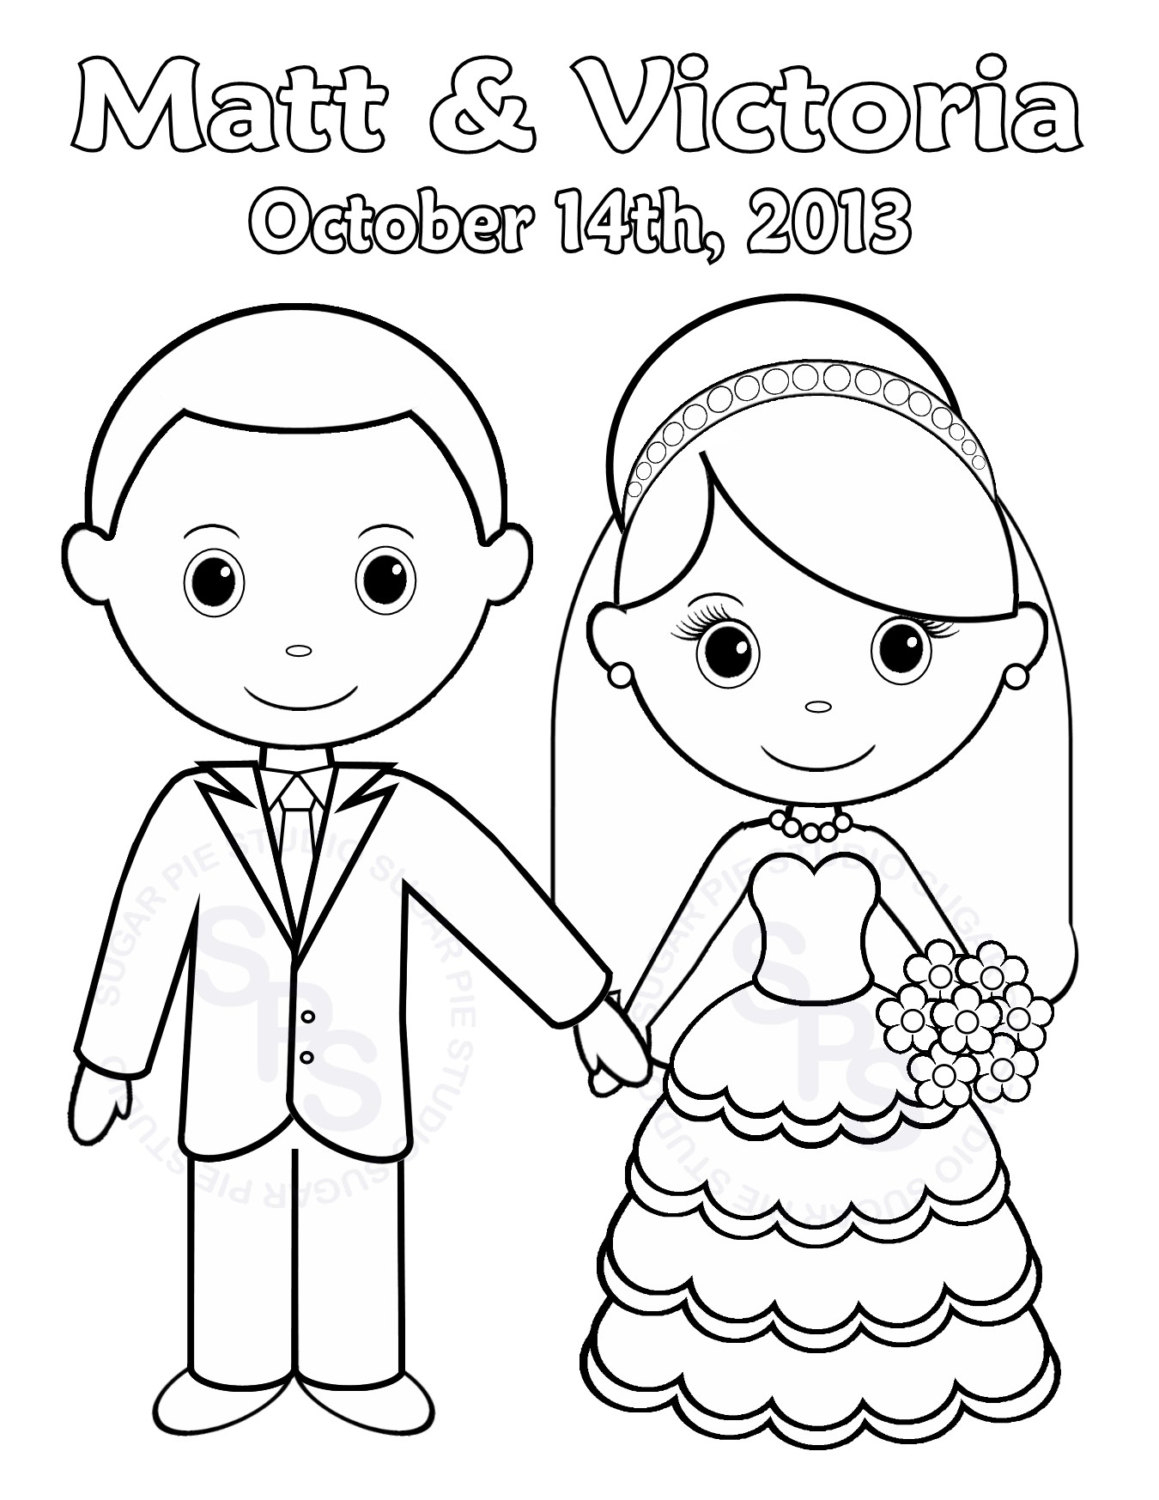 Coloring Pages ~ Printable Inspirationalg Pages Best Of Free - Free Printable Personalized Wedding Coloring Book